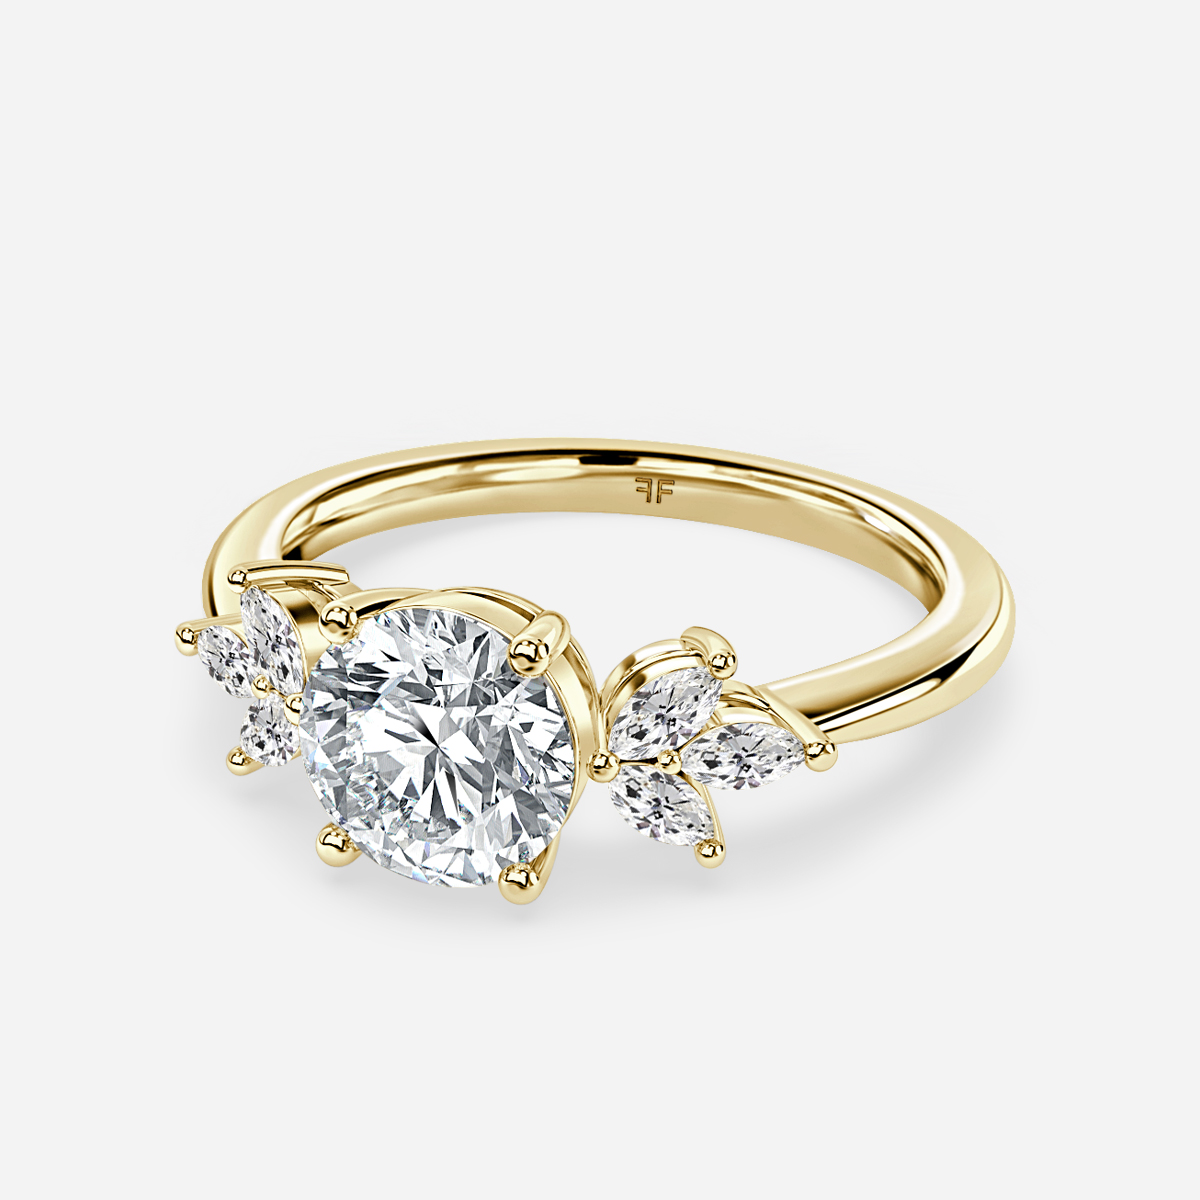 Adriana Yellow Gold Trilogy Engagement Ring